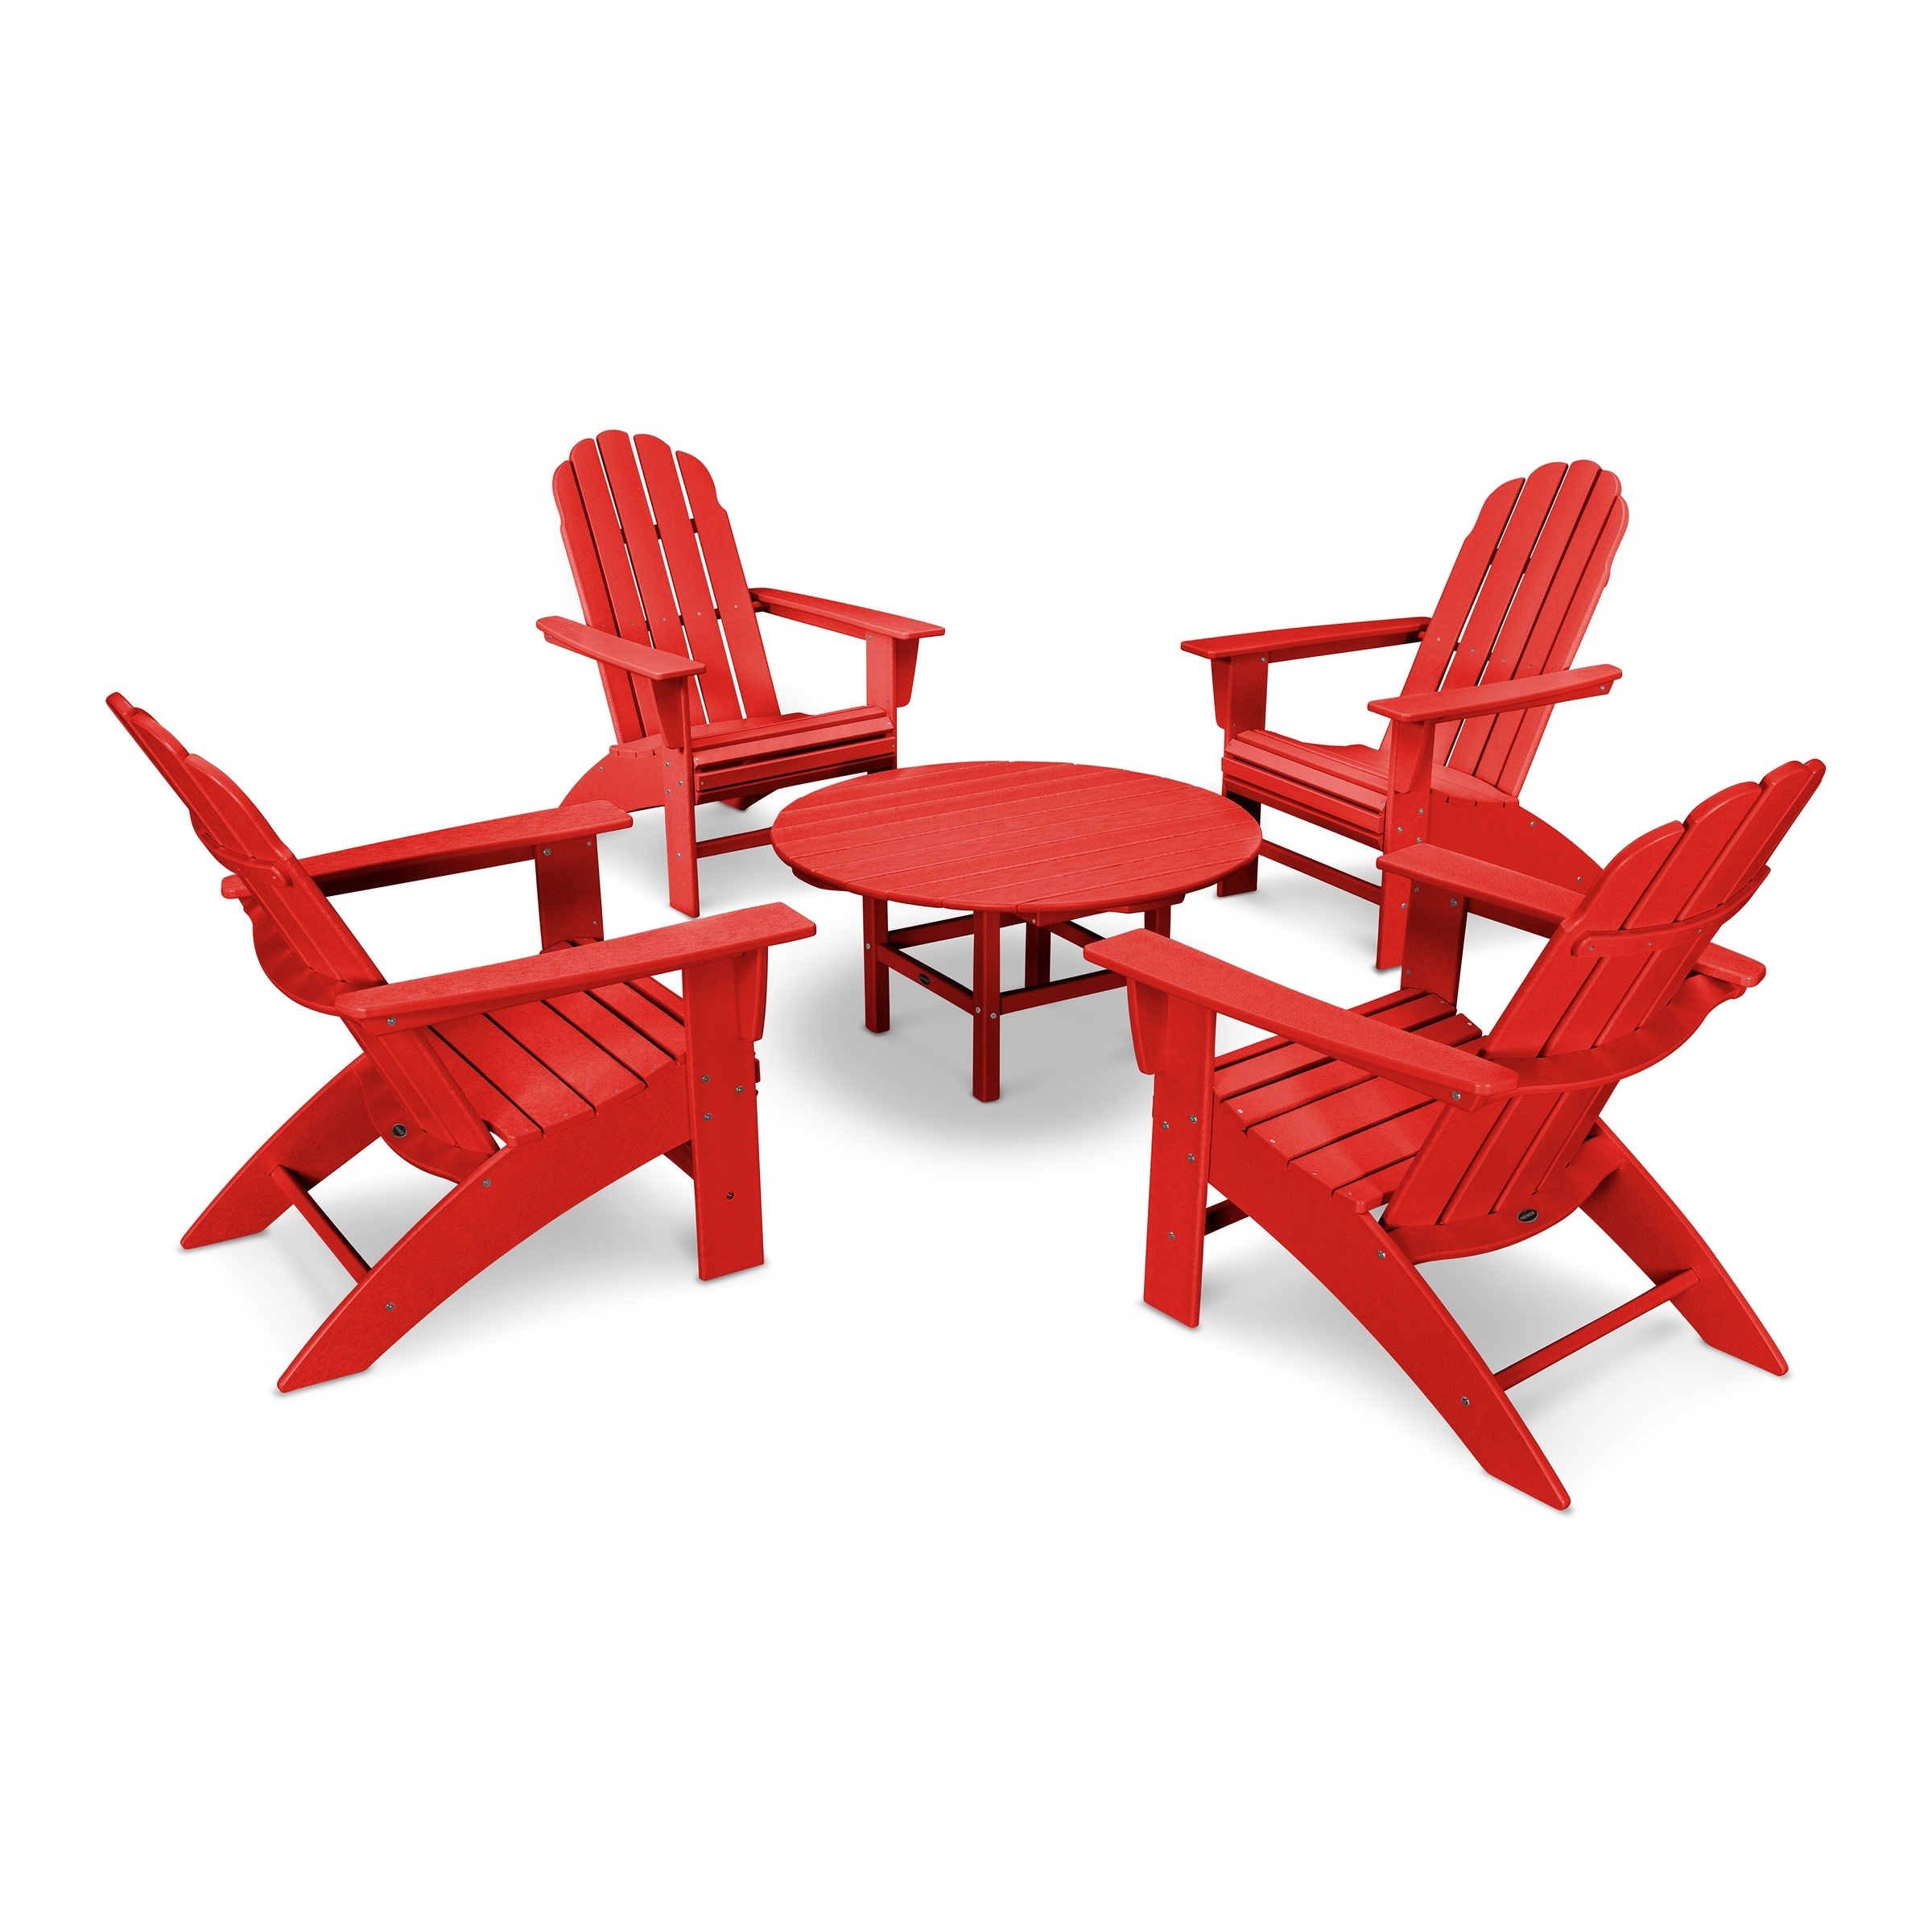 Polywood Vineyard 5-piece Outdoor Oversized Adirondack Chair And Table Set